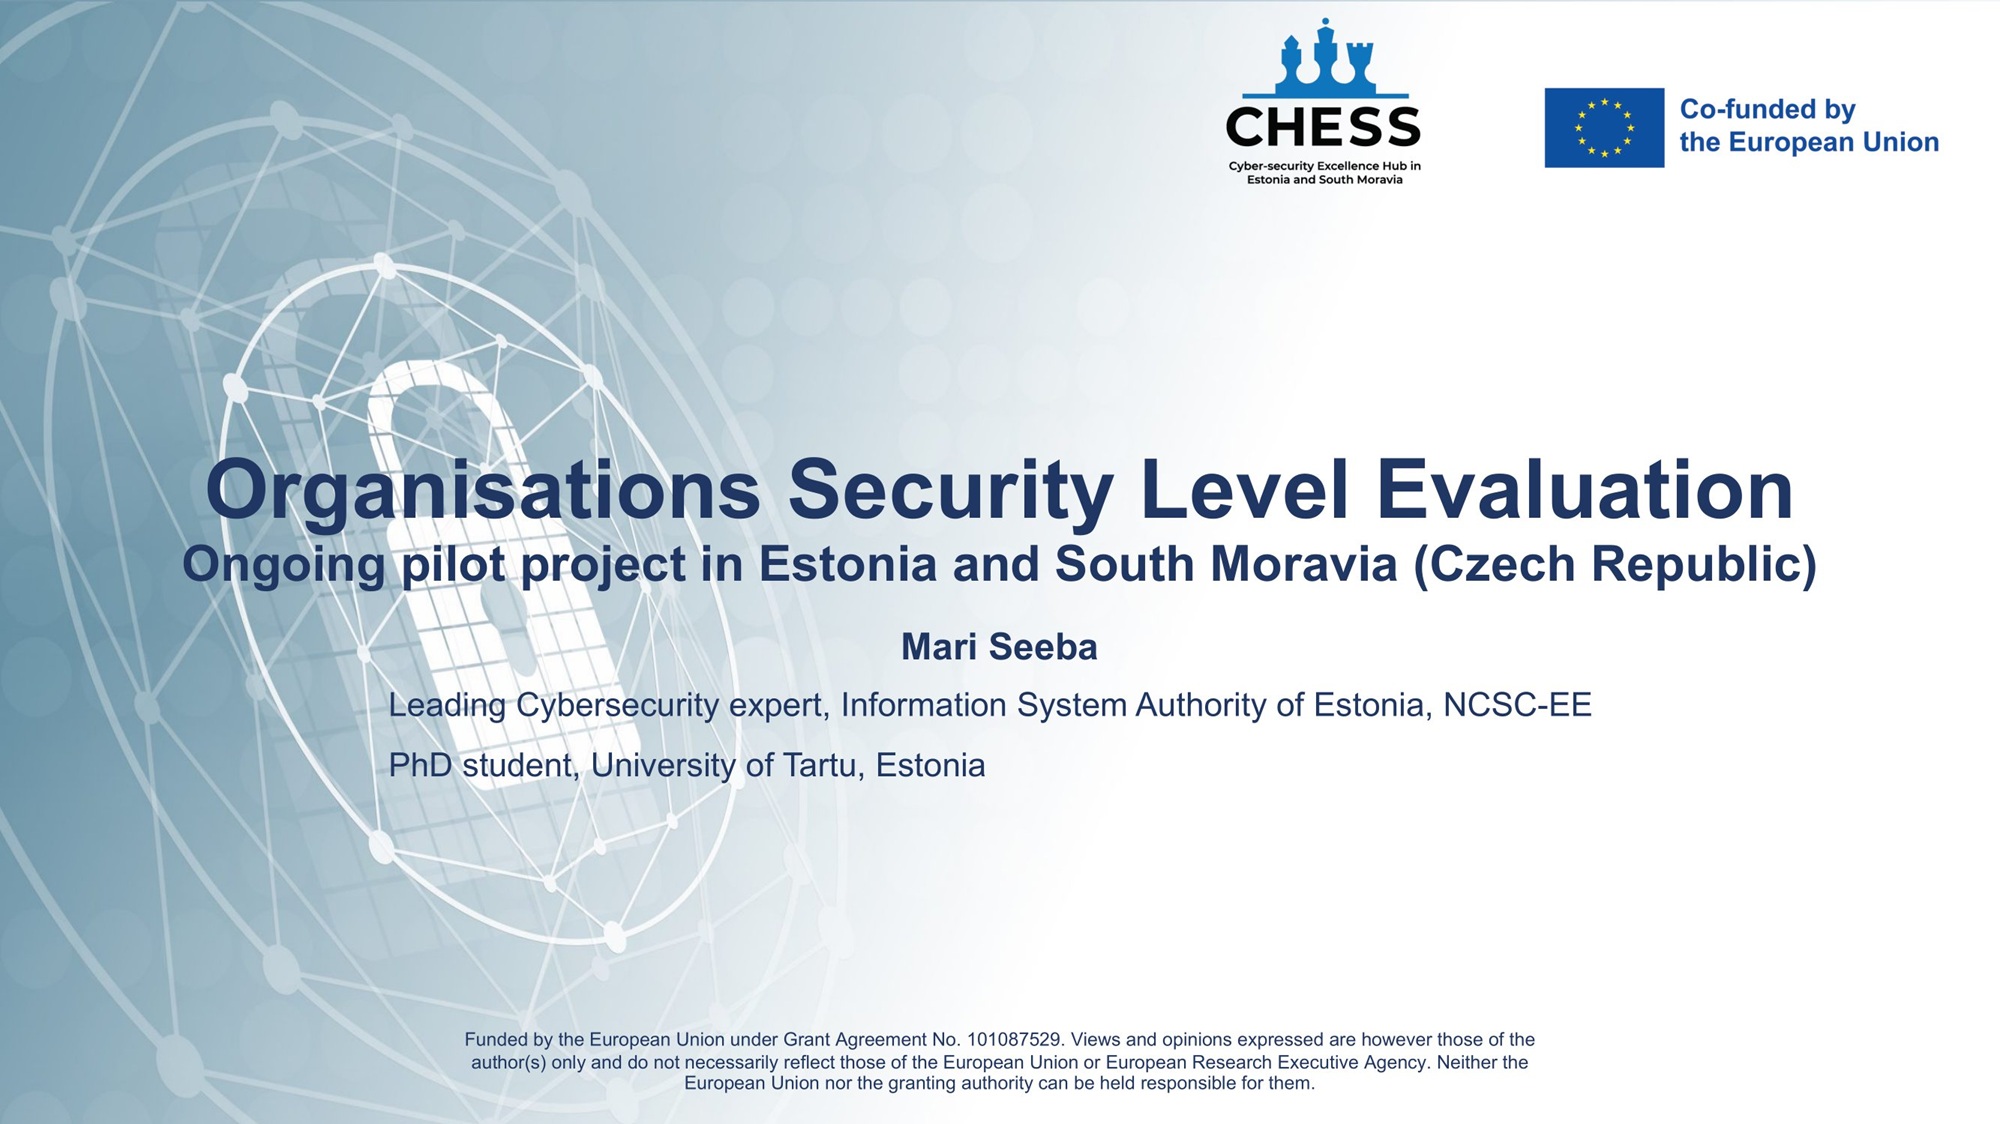 CHESS: Cyber-security Excellence Hub in Estonia and South Moravia - Red Hat  Research